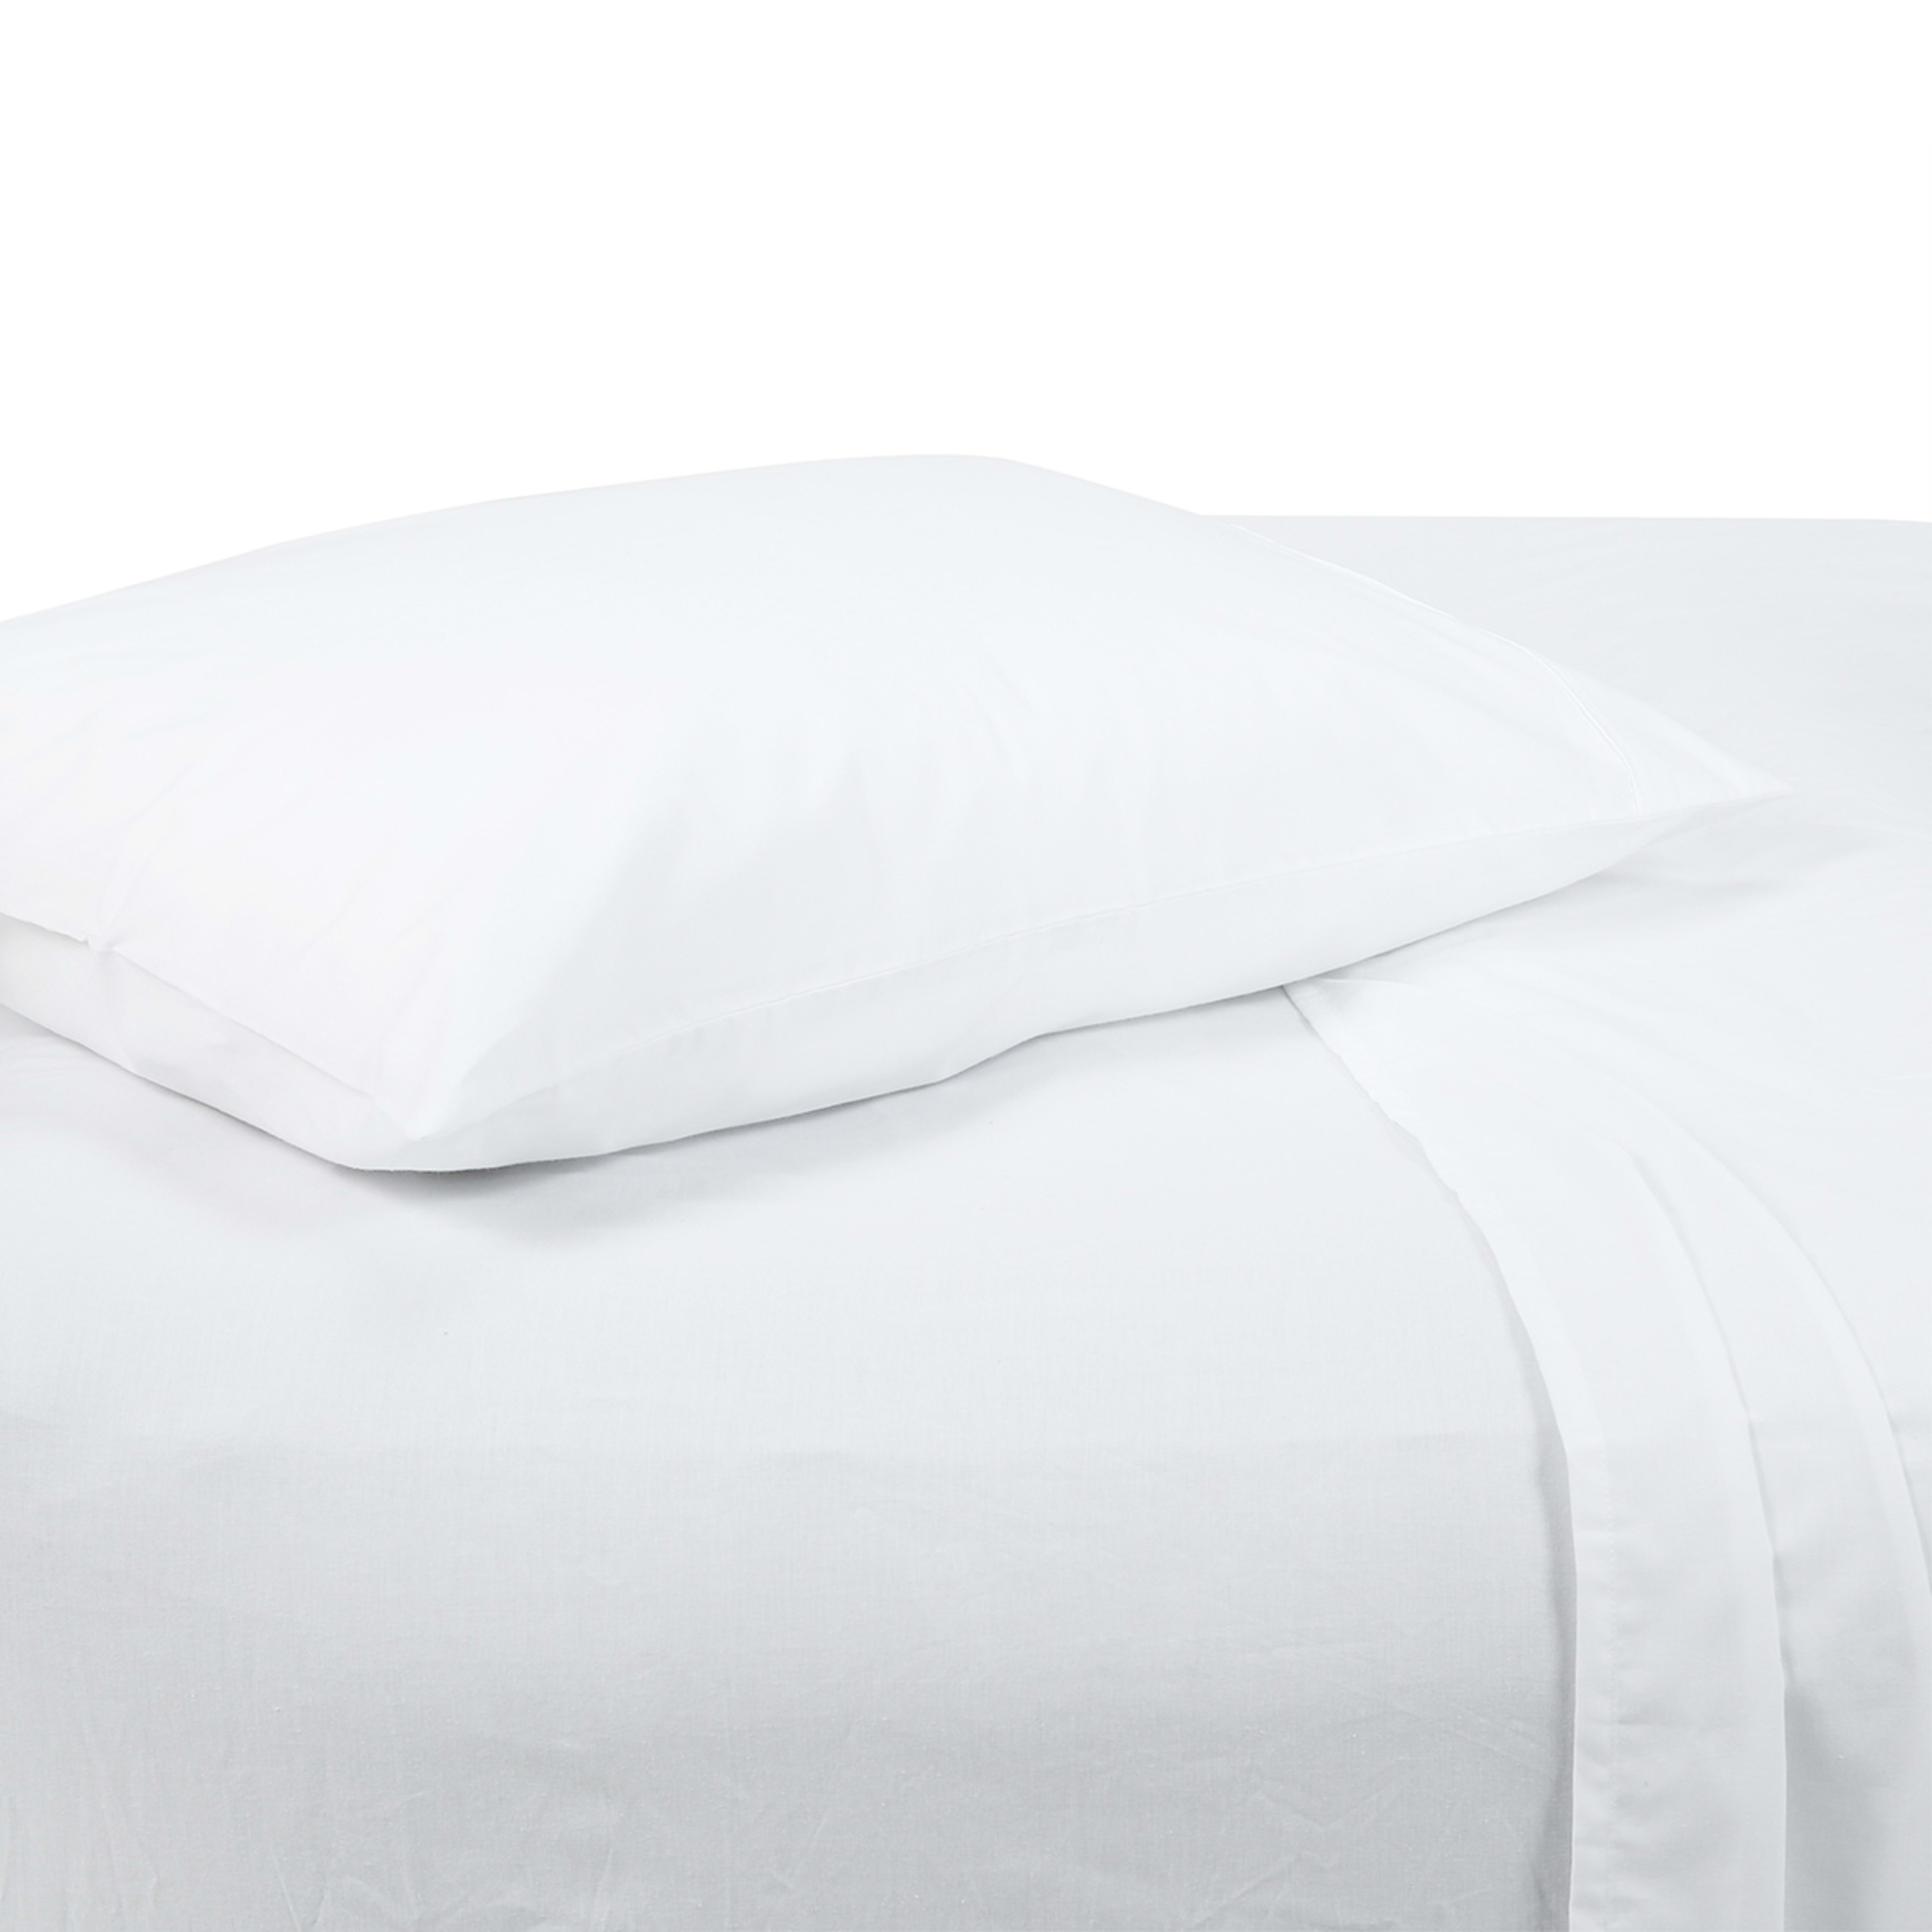 180 Thread Count Sheet Set - Single Bed, White